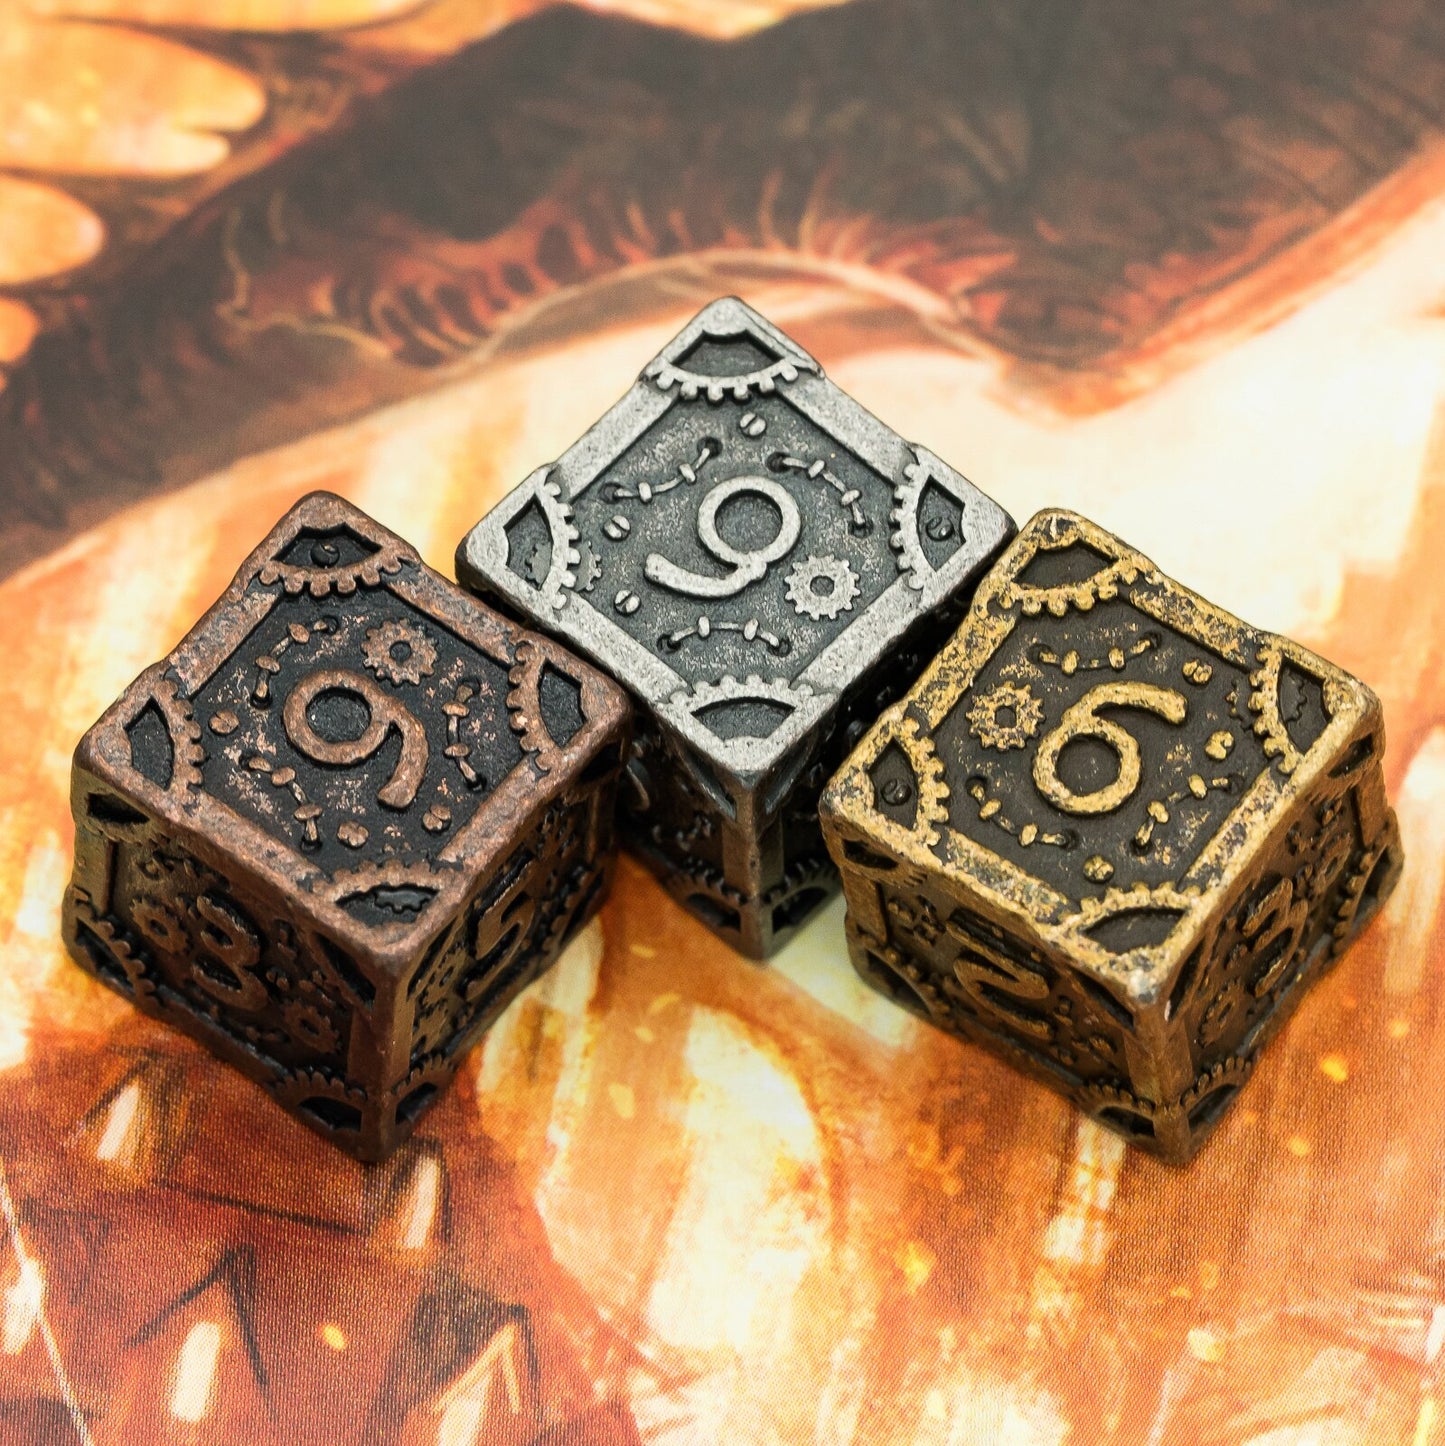 three d6s of bronze silver and gold coloring from steampunk dice sets